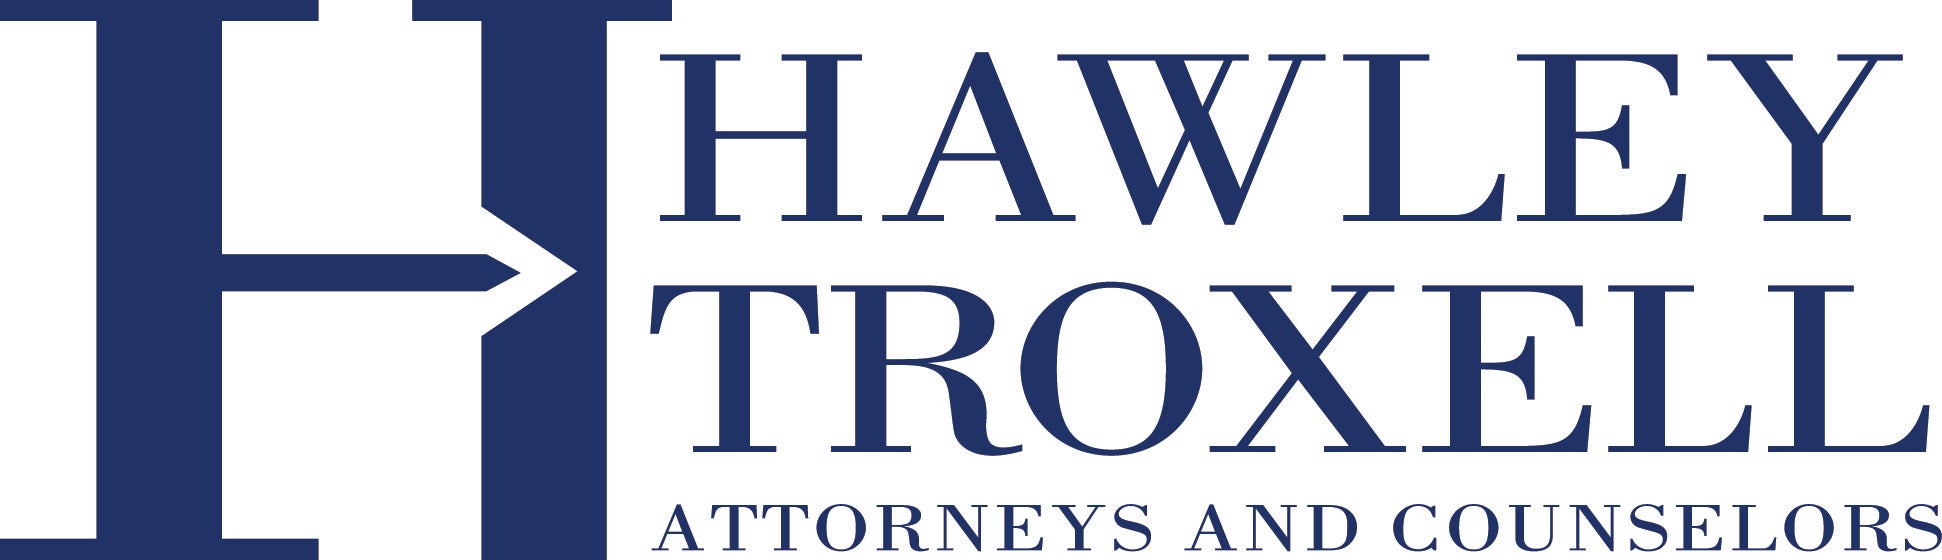 Hawley Troxell Attorneys and Counselors